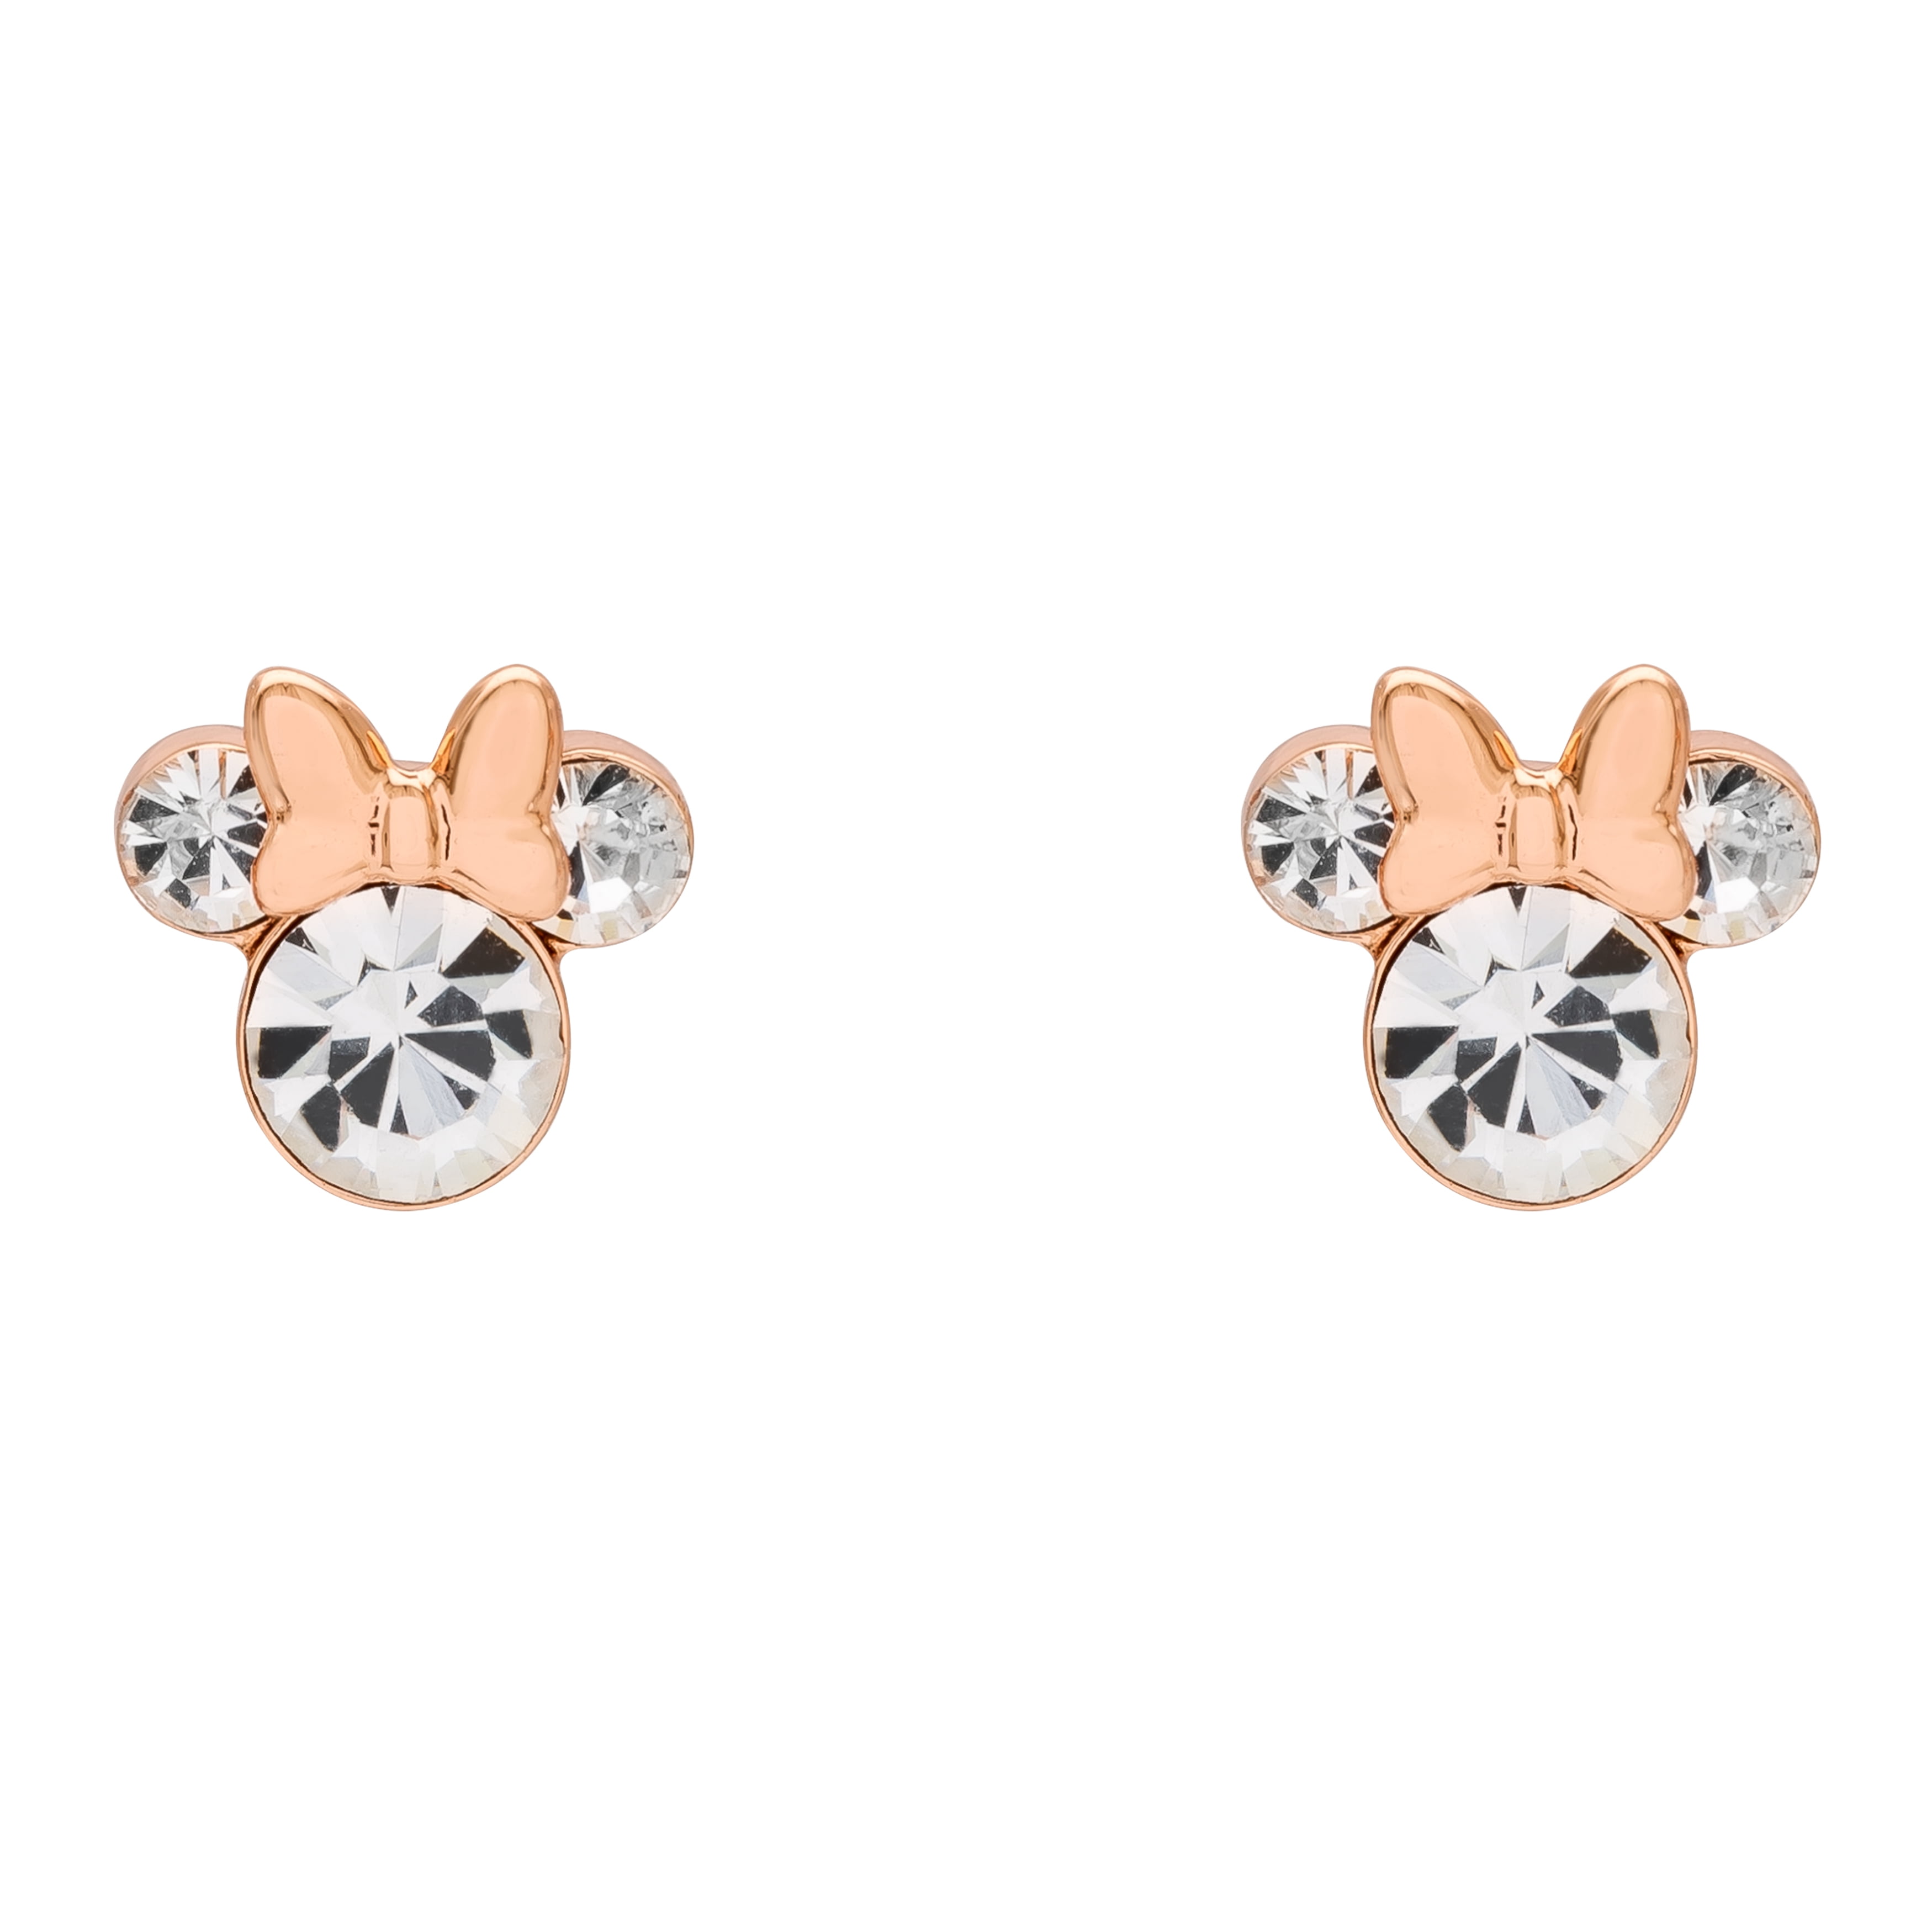 Mickey Mouse Swar Crystal Earrings Studs Multi Colour Platinum Plated 